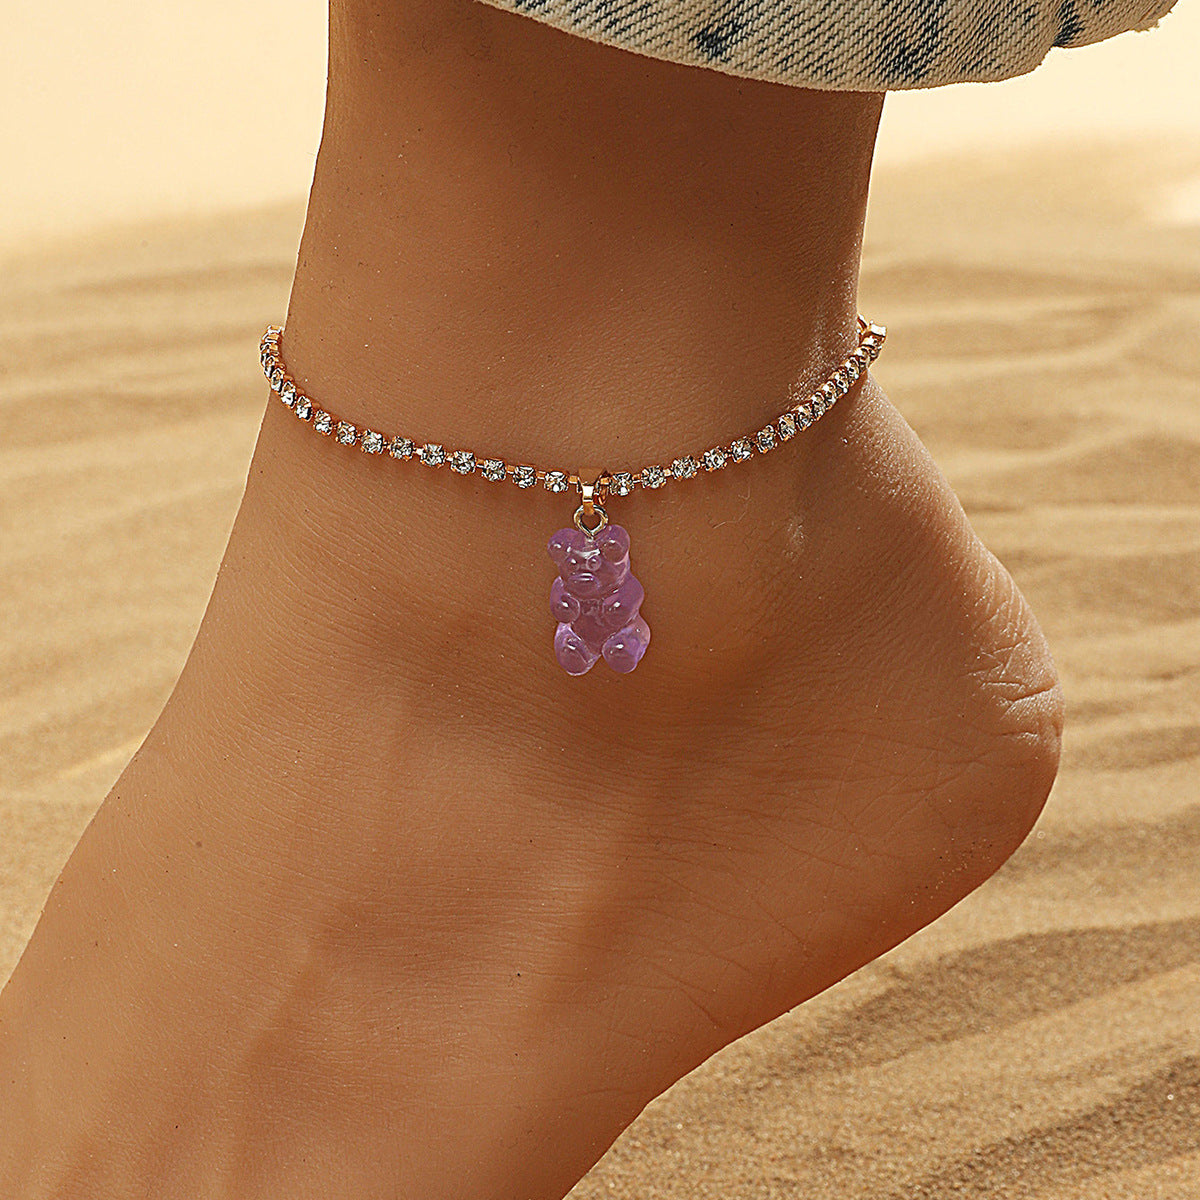 Fashionable exquisite diamond chain design with creative bear pendant anklet - Syble's